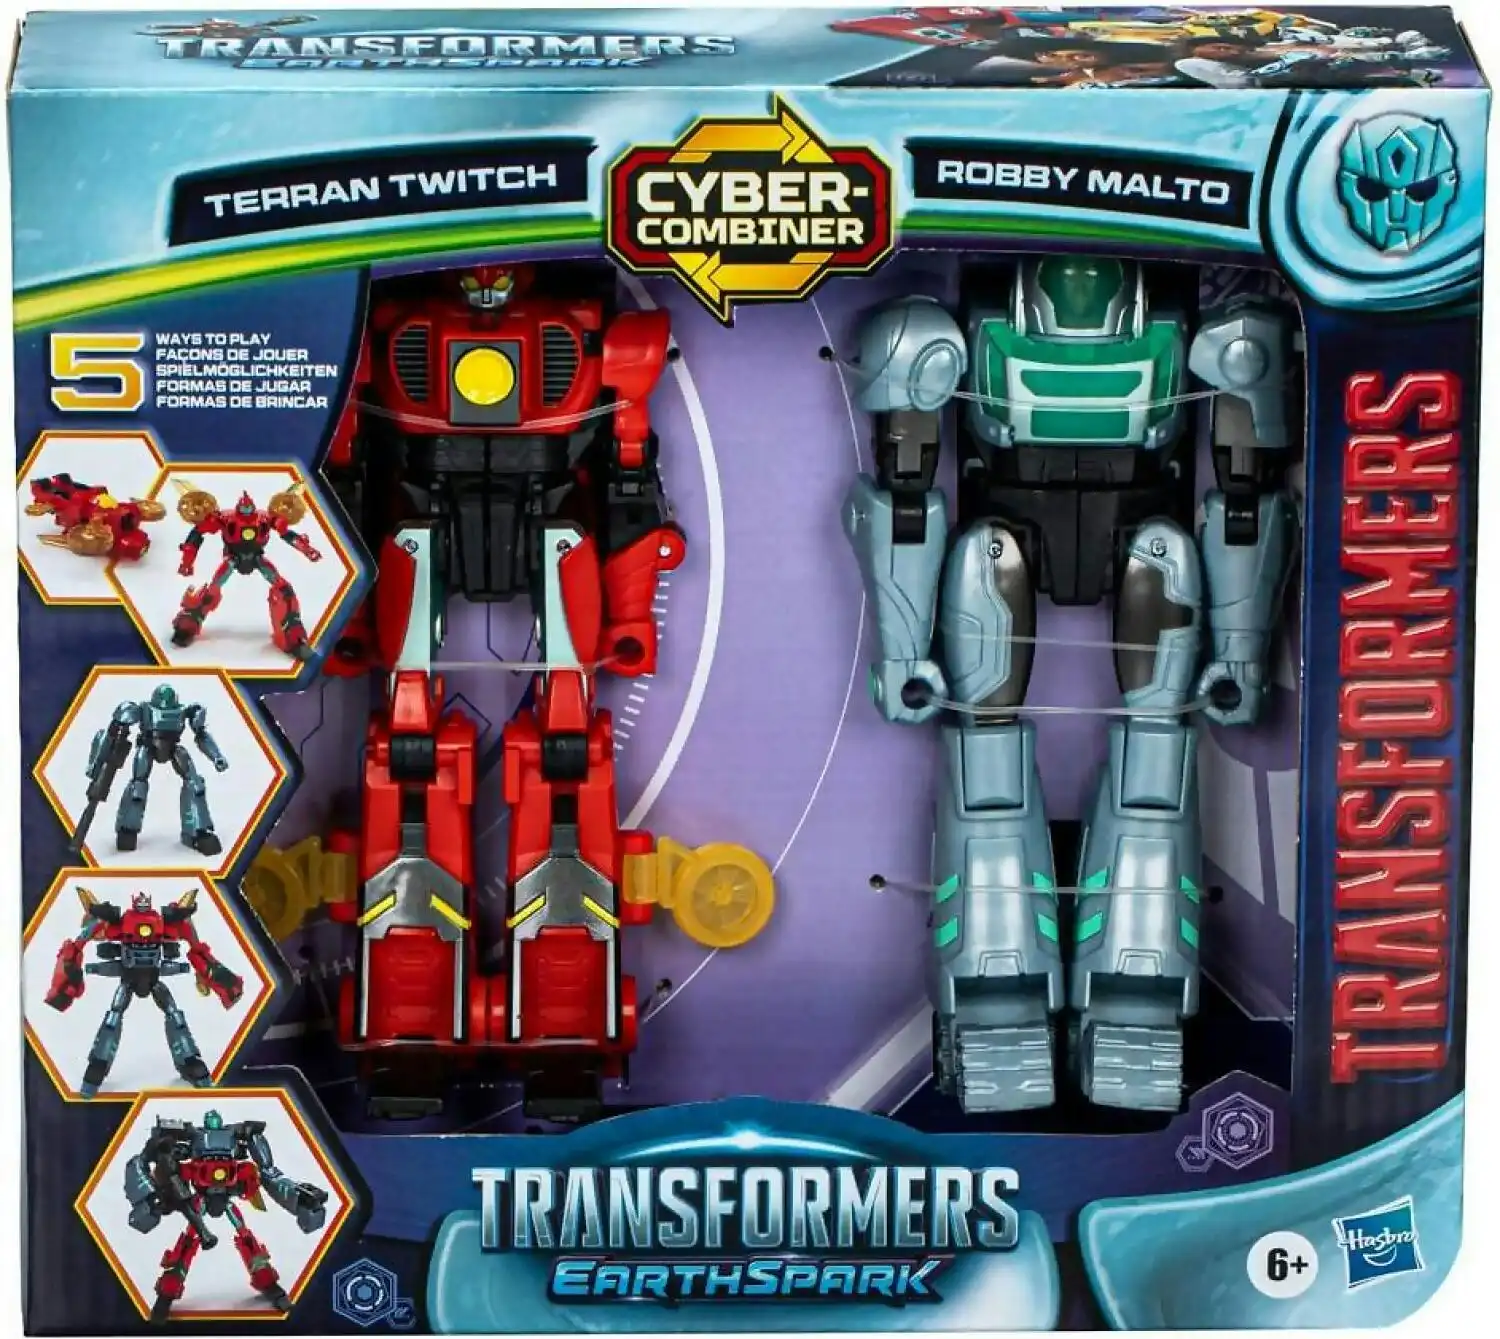 Transformers - Earthspark Cyber-combiner Terran Twitch And Robby Malto Action Figures - Hasbro